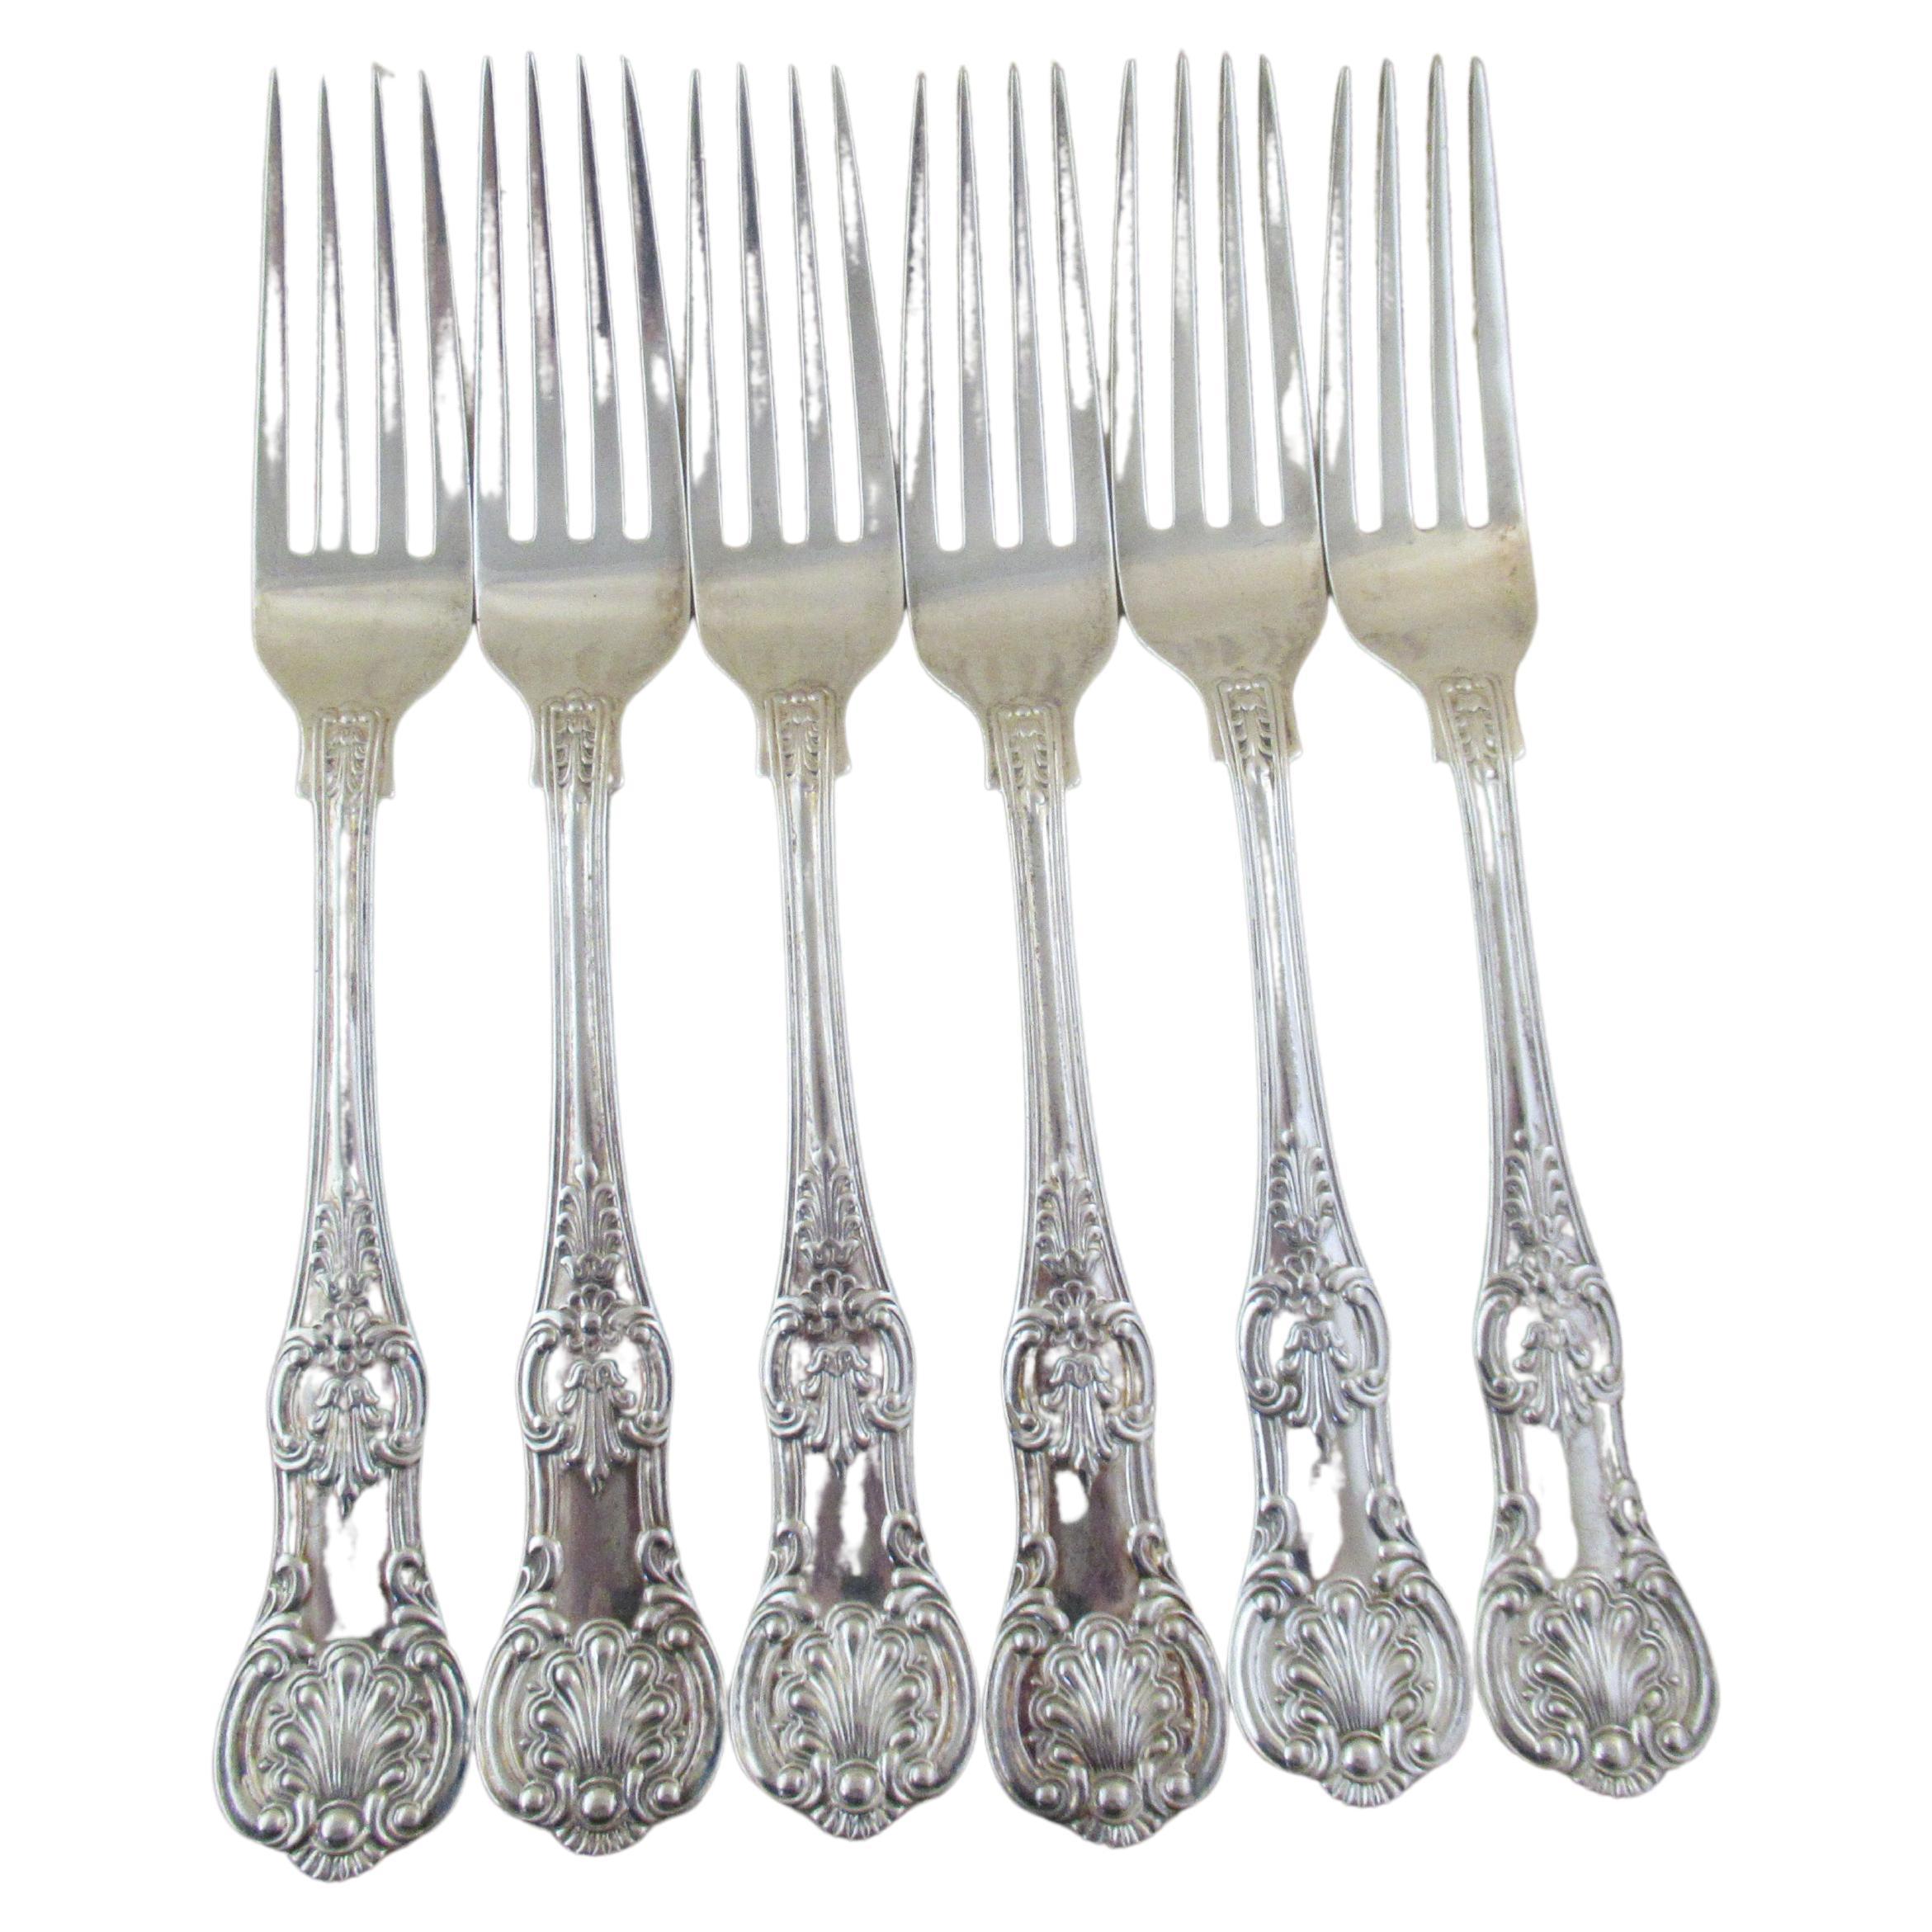 Good set of 6 English Sterling Kings Pattern Table Forks, London